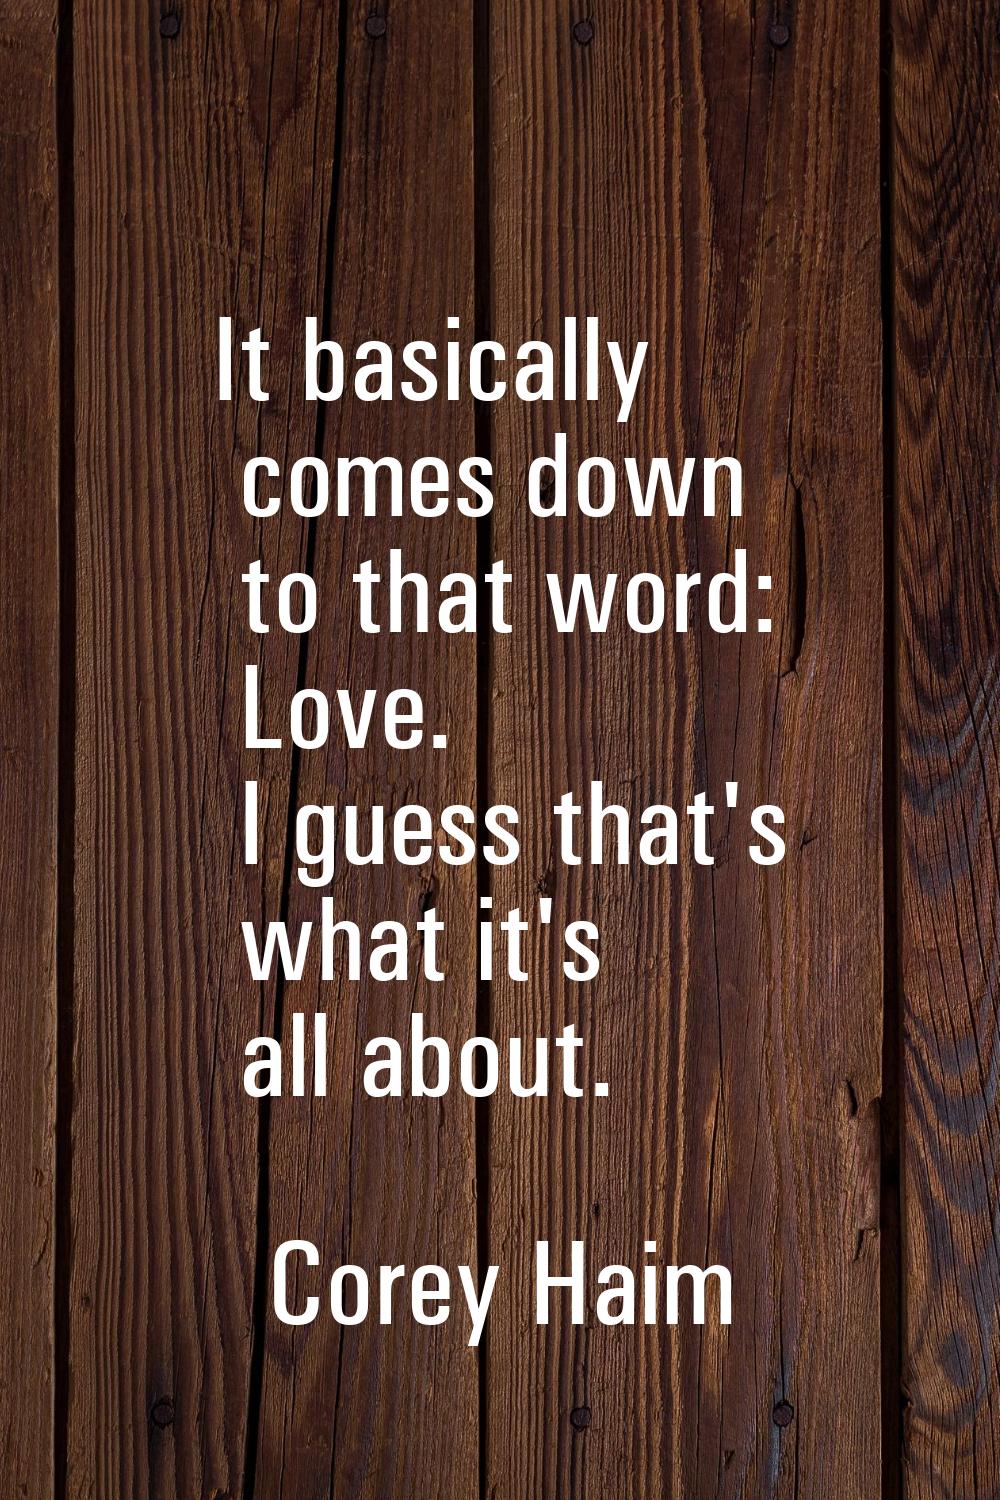 It basically comes down to that word: Love. I guess that's what it's all about.